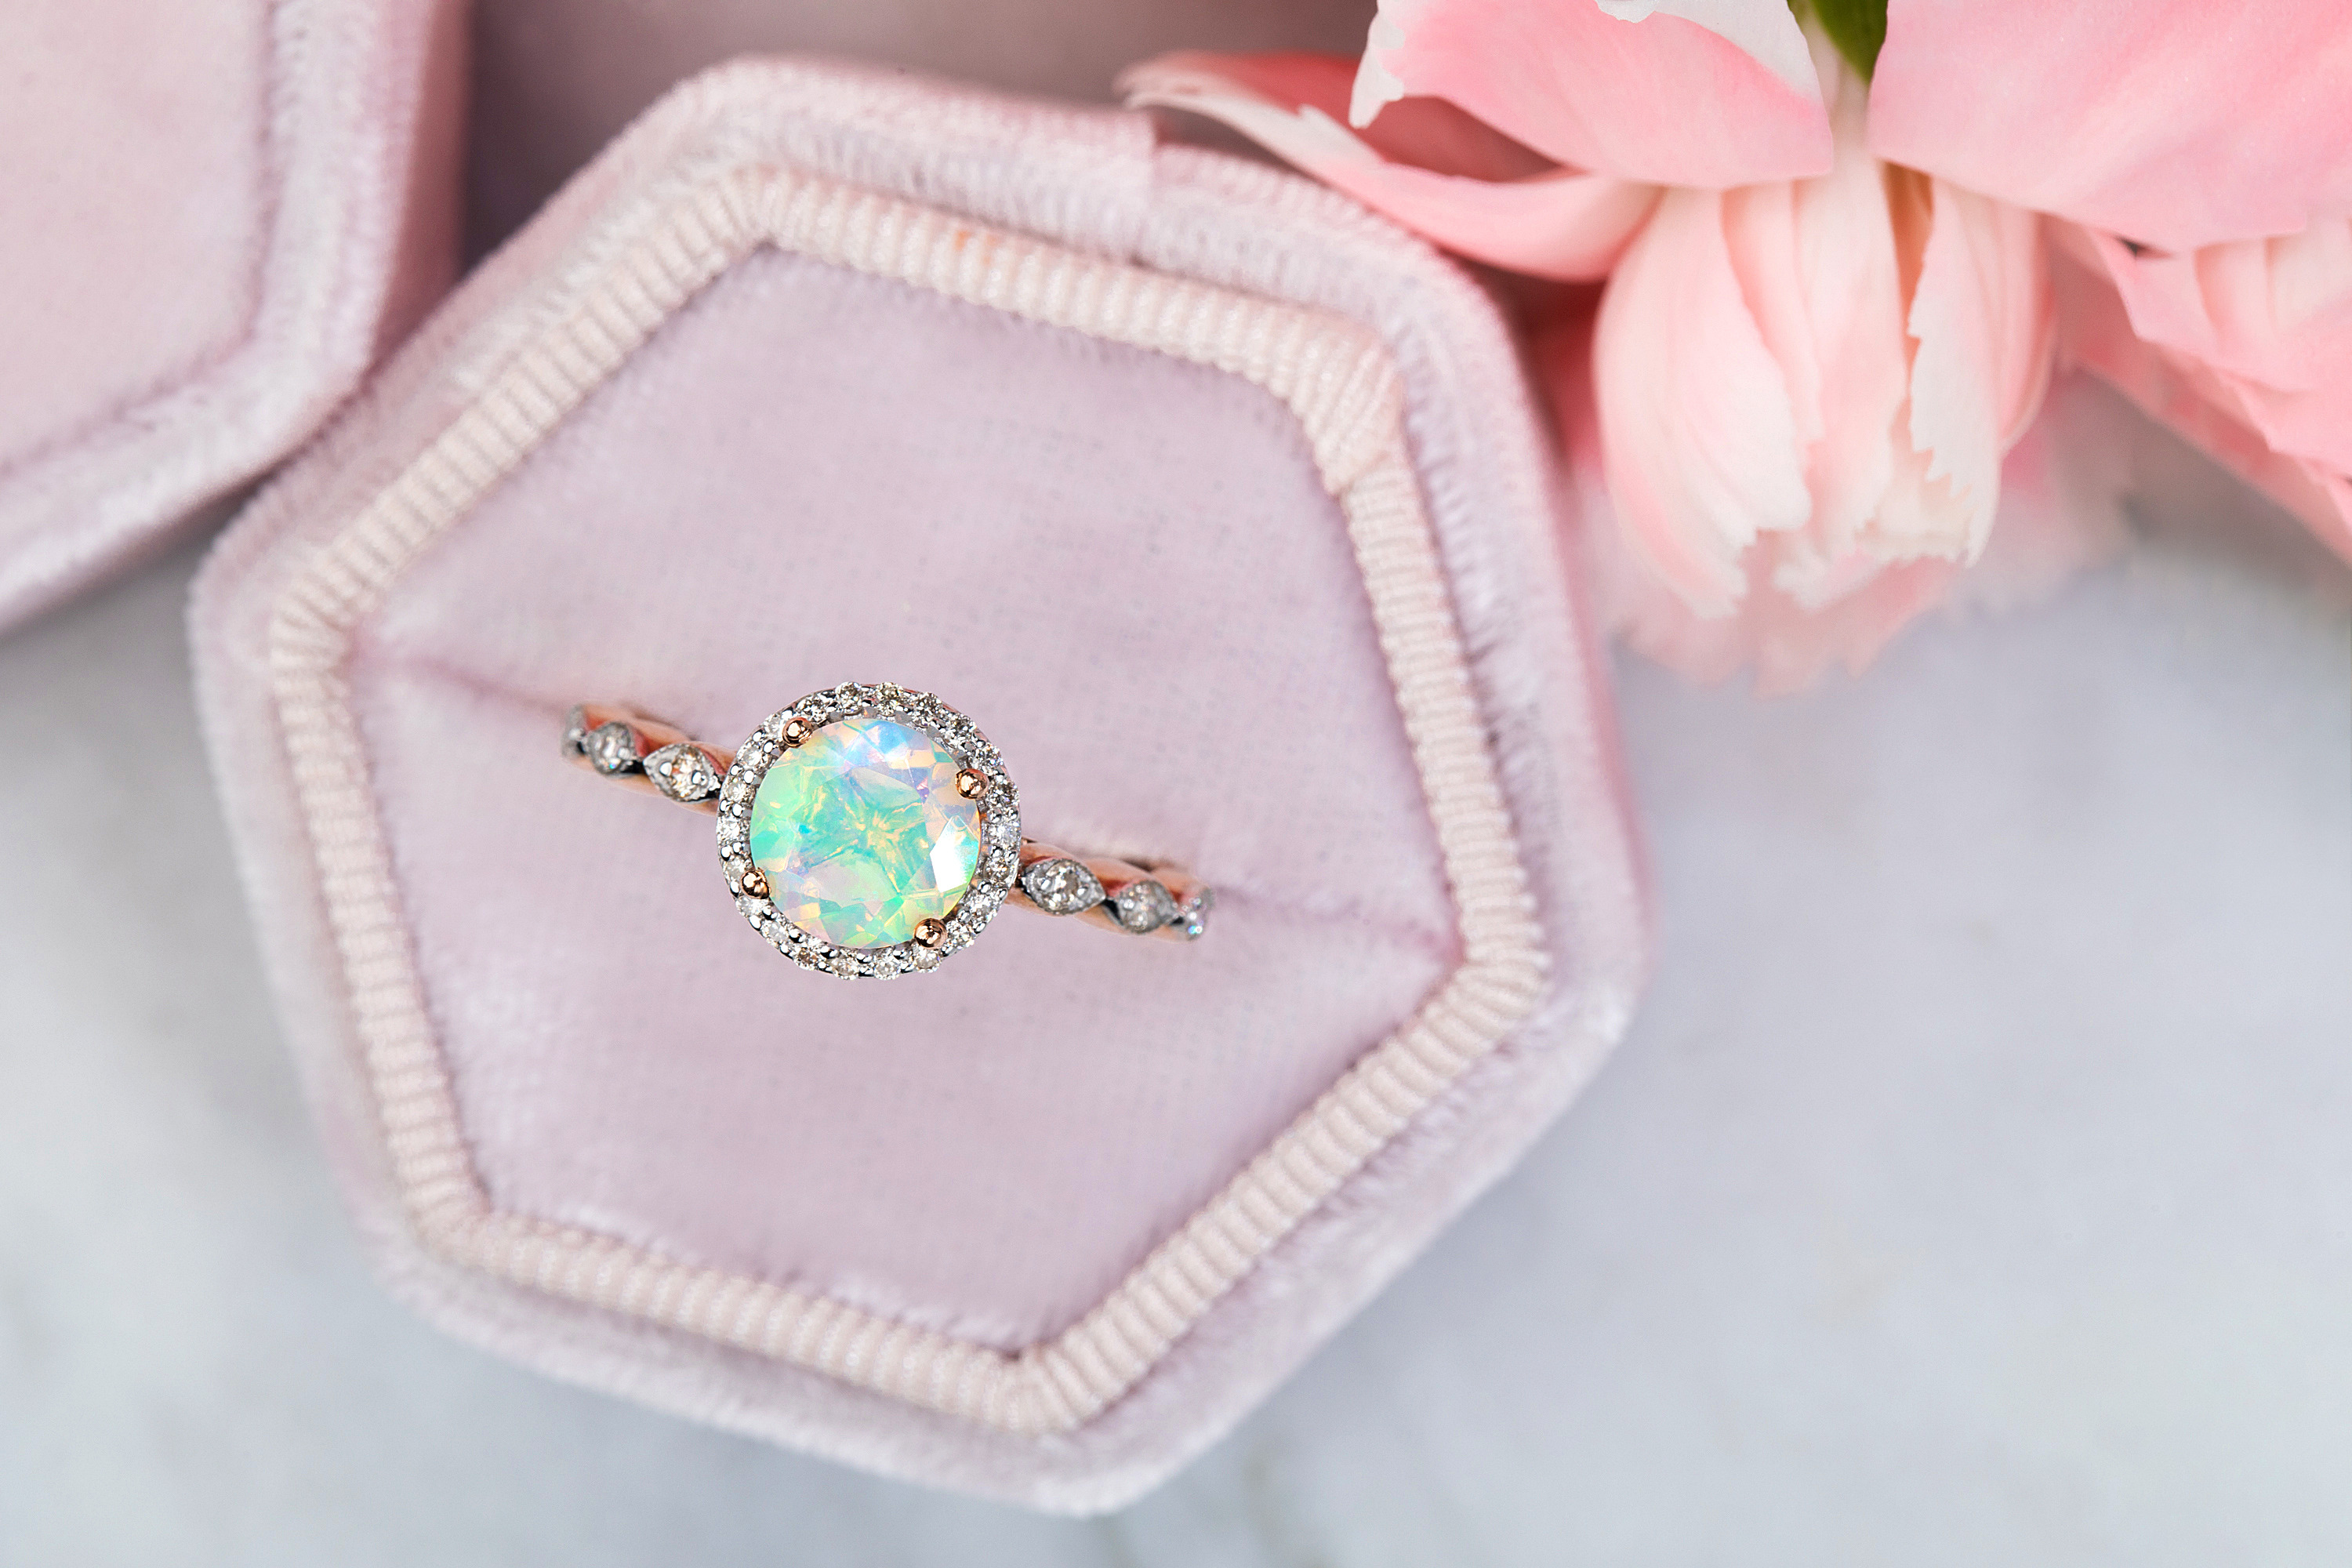 The Opal Diamond Ring Soulmate is presented in an open rose ring box.